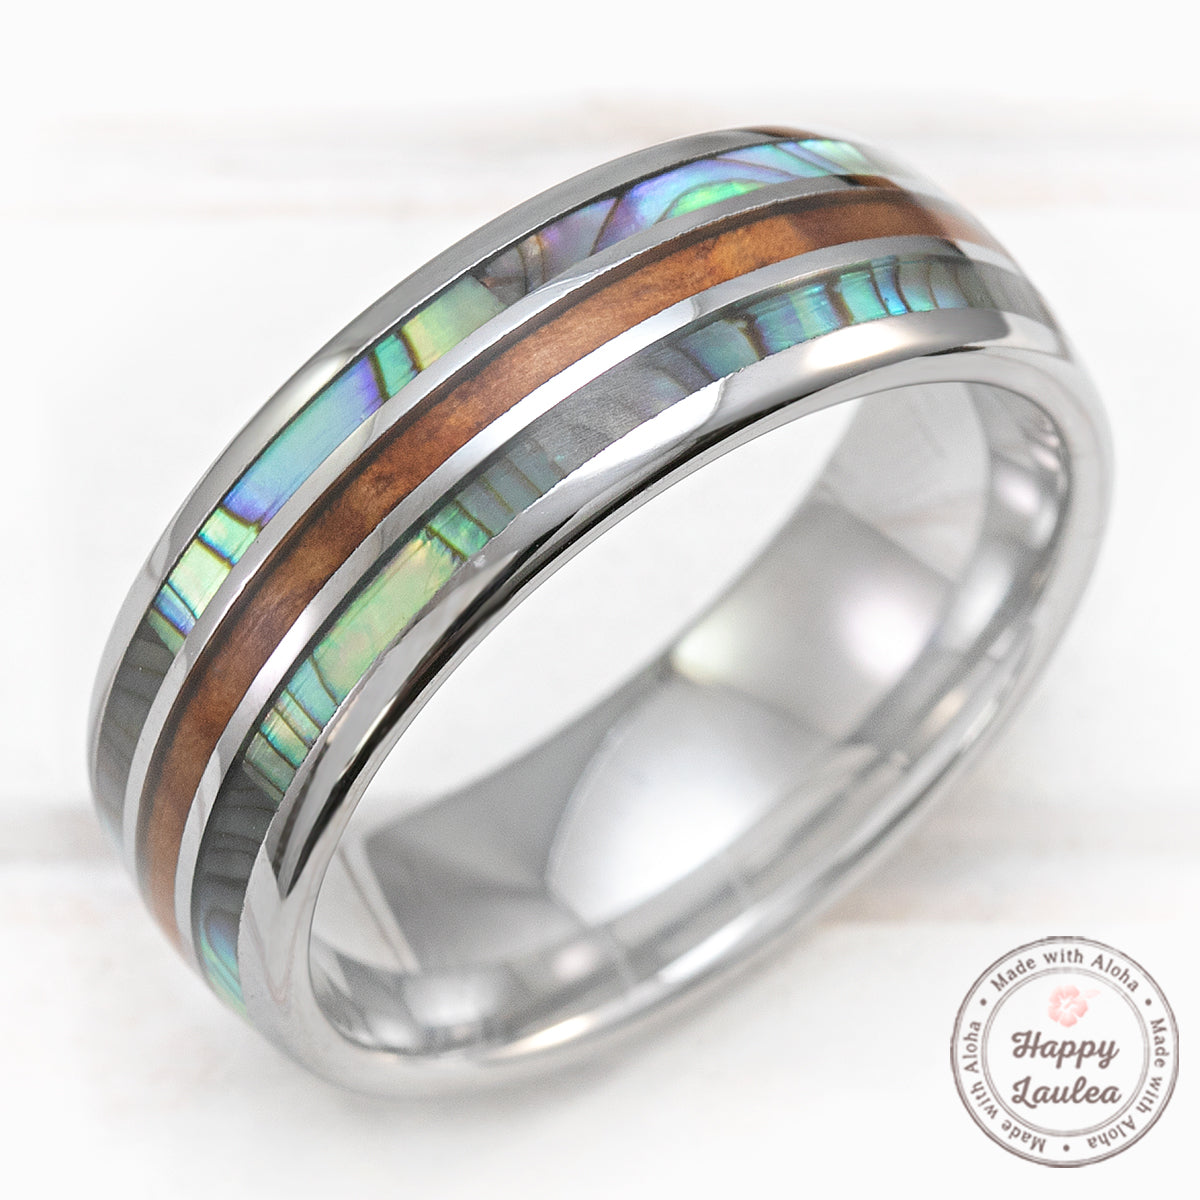 Tungsten Carbide 8mm Ring with Abalone Shell & Hawaiian Koa Wood Tri-Inlay (Shell-Wood-Shell) - Dome Shape, Comfort Fitment